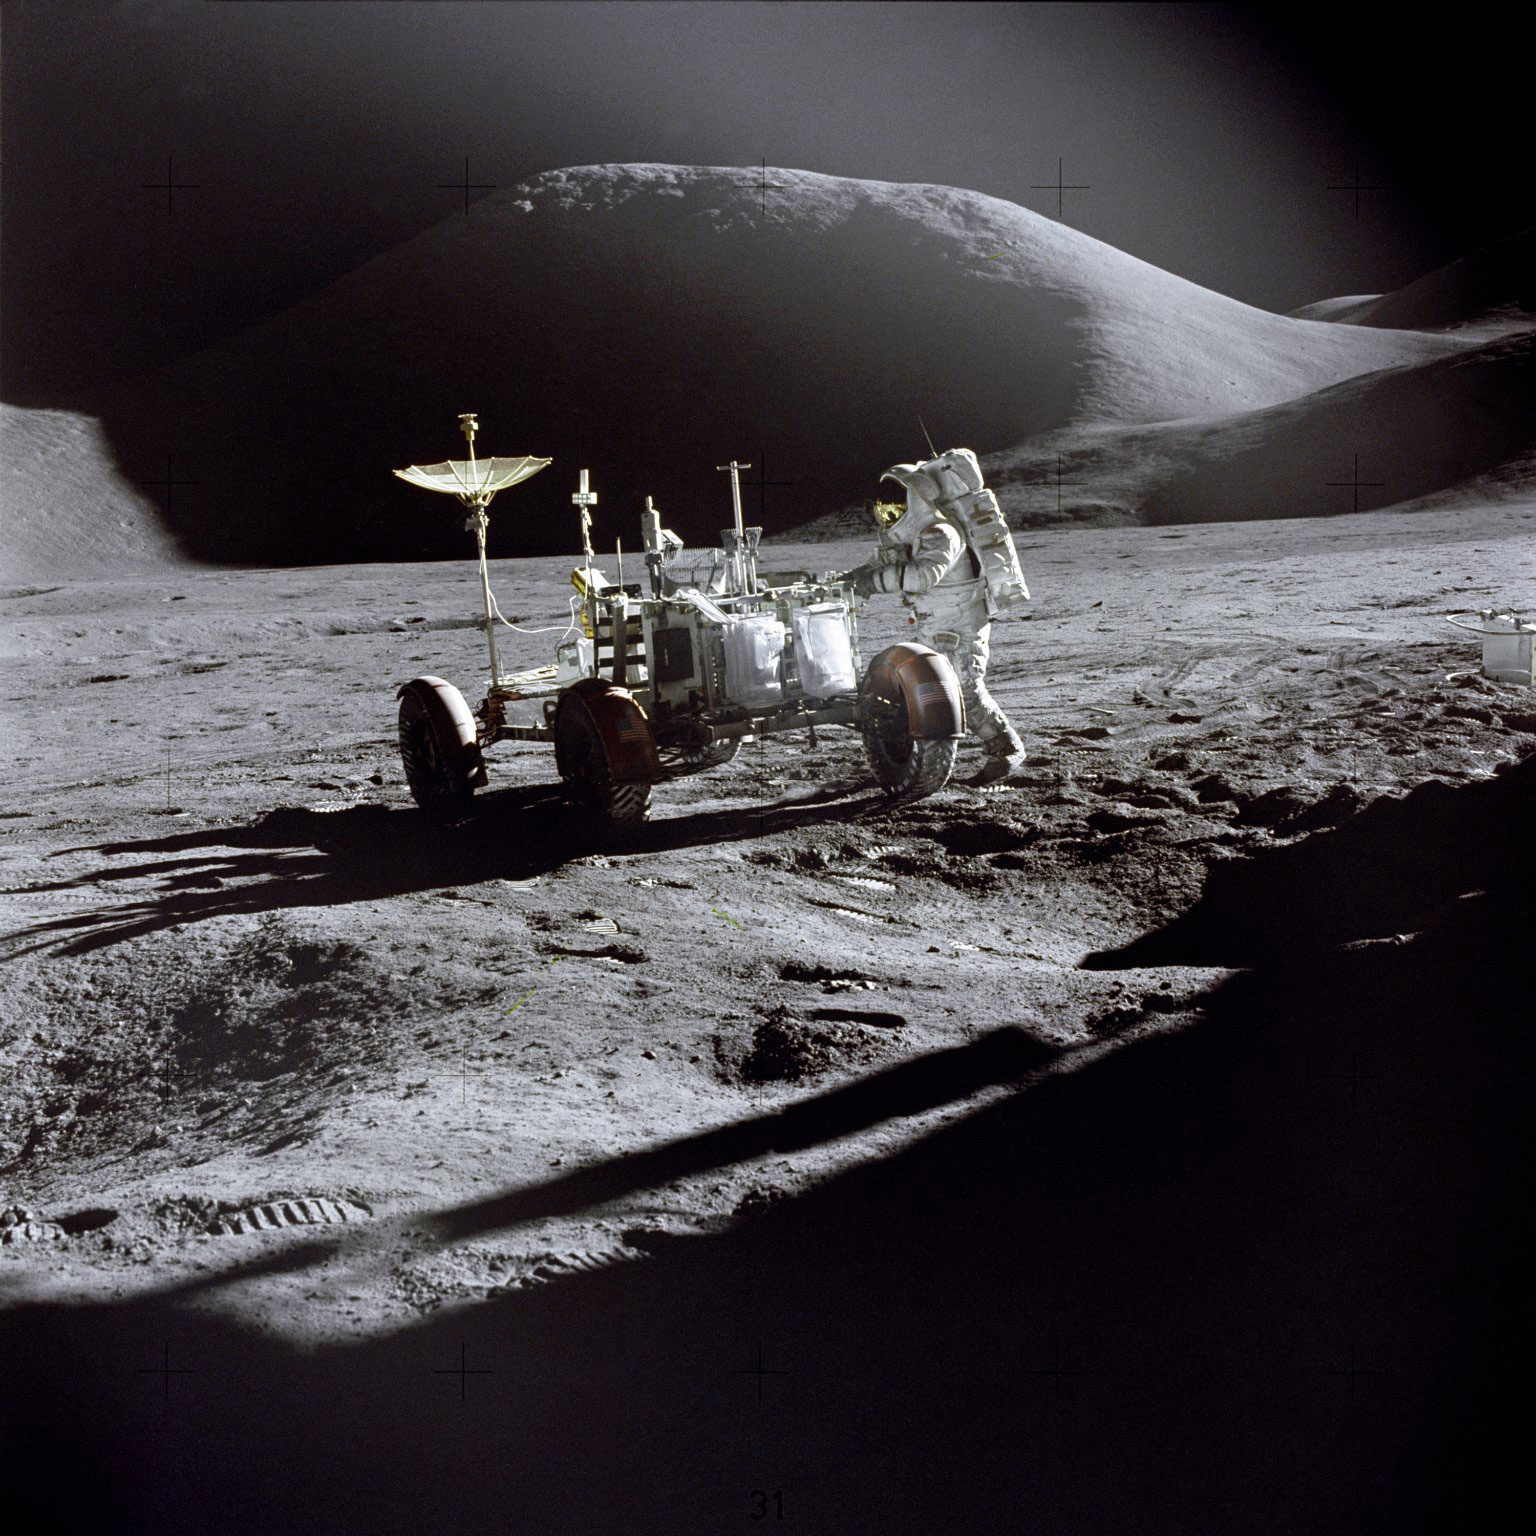 Jim Irwin is photographed beside the Lunar Roving Vehicle, with Mount Hadley in the background. Seen on the back of the Rover are two sample collection bags mounted on the gate, along with the rake, both pairs of tongs, the extension handle with scoop probably attached, and the penetrometer. Credit: NASA